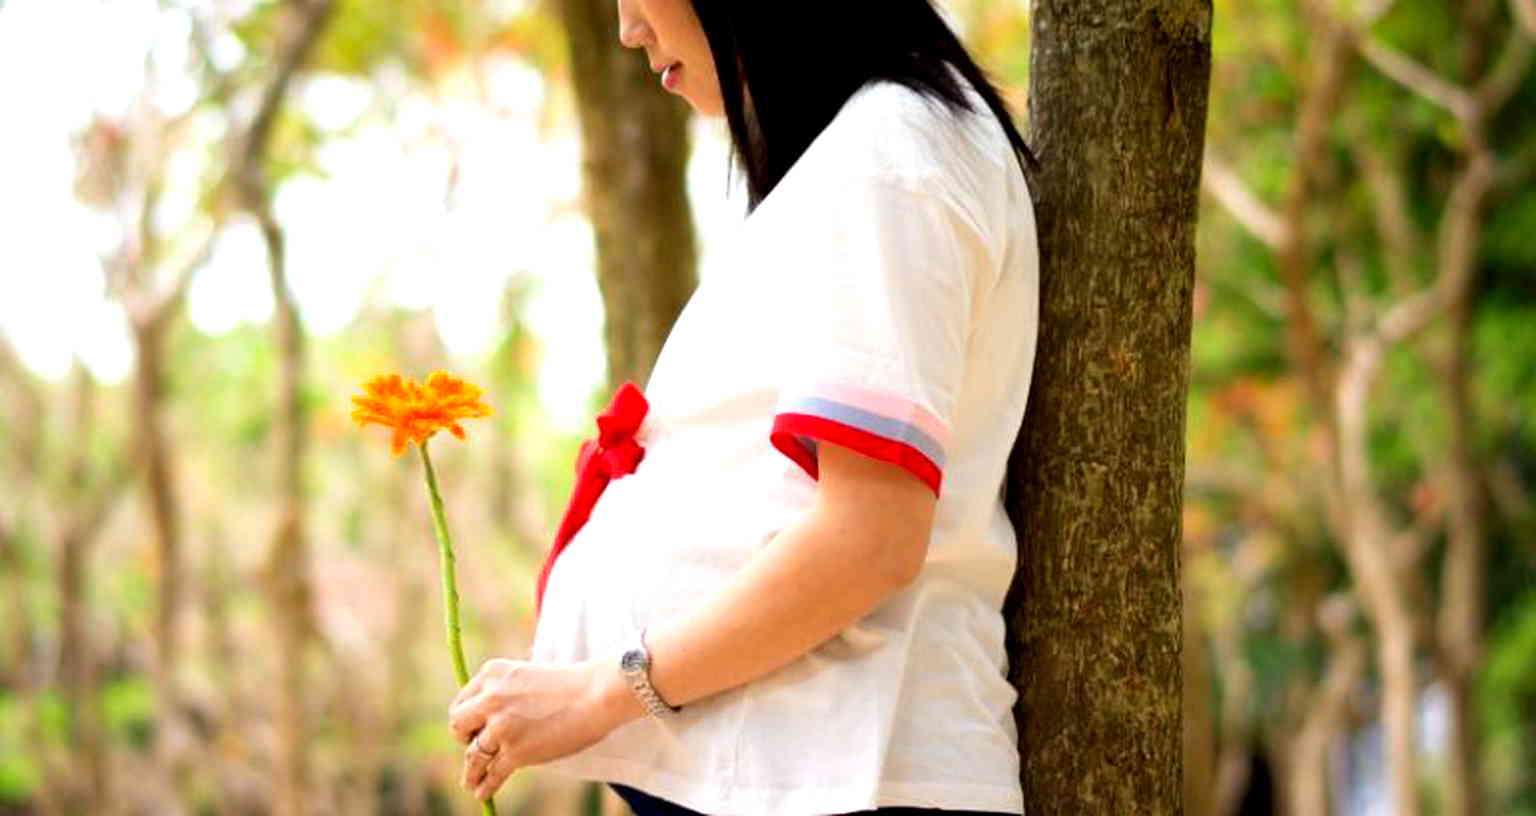 Chinese company fined for firing pregnant worker who napped during forced overnight shifts